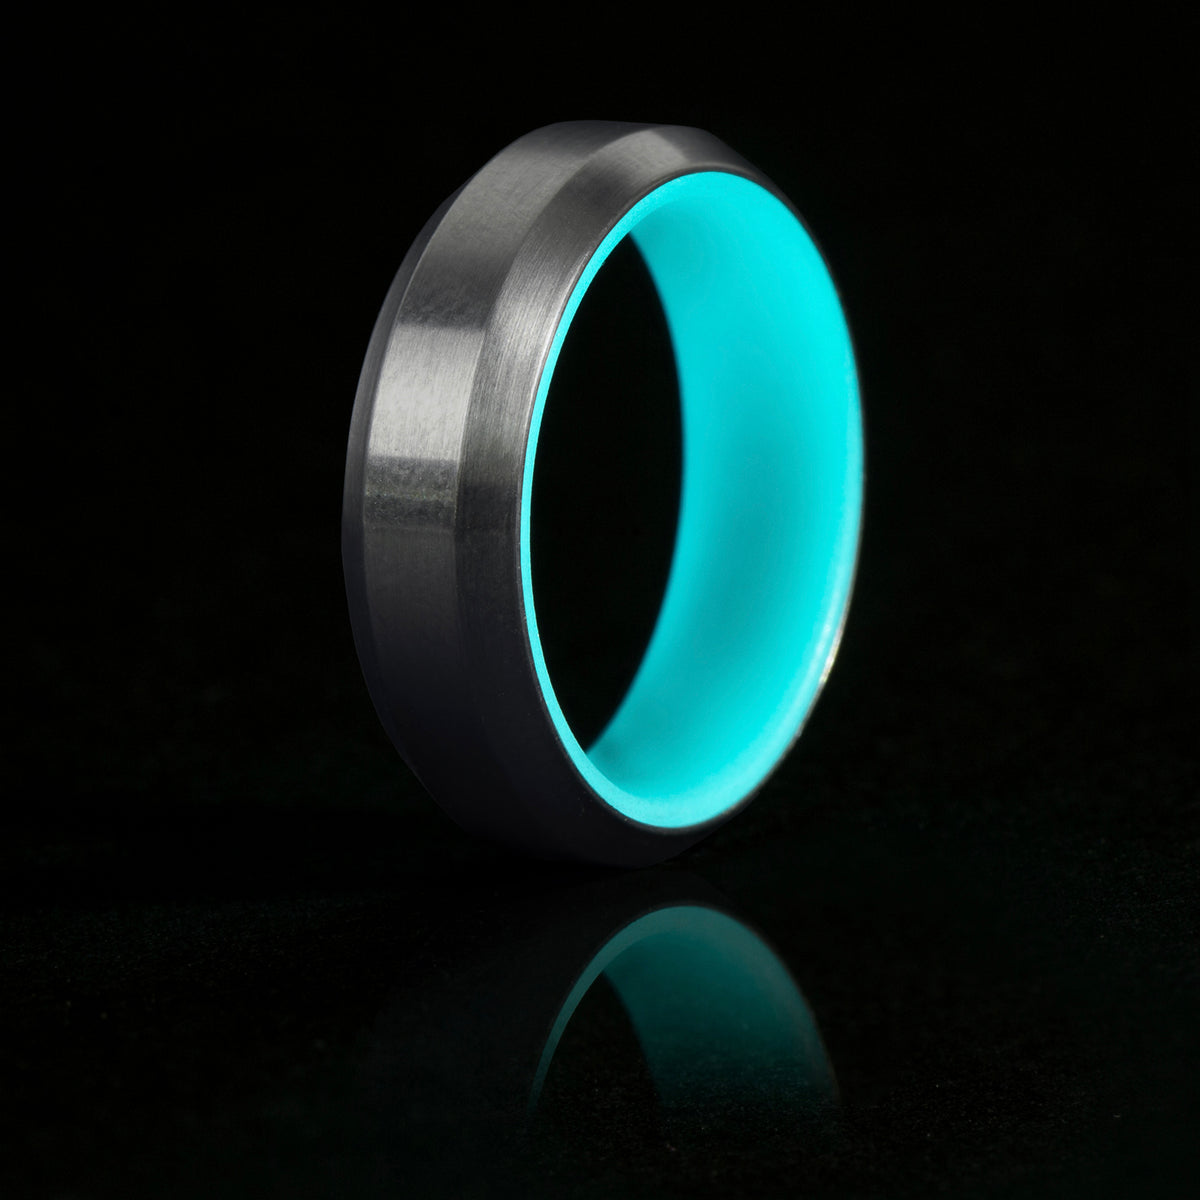 Turquoise glow ring with titanium exterior and beveled edges. 